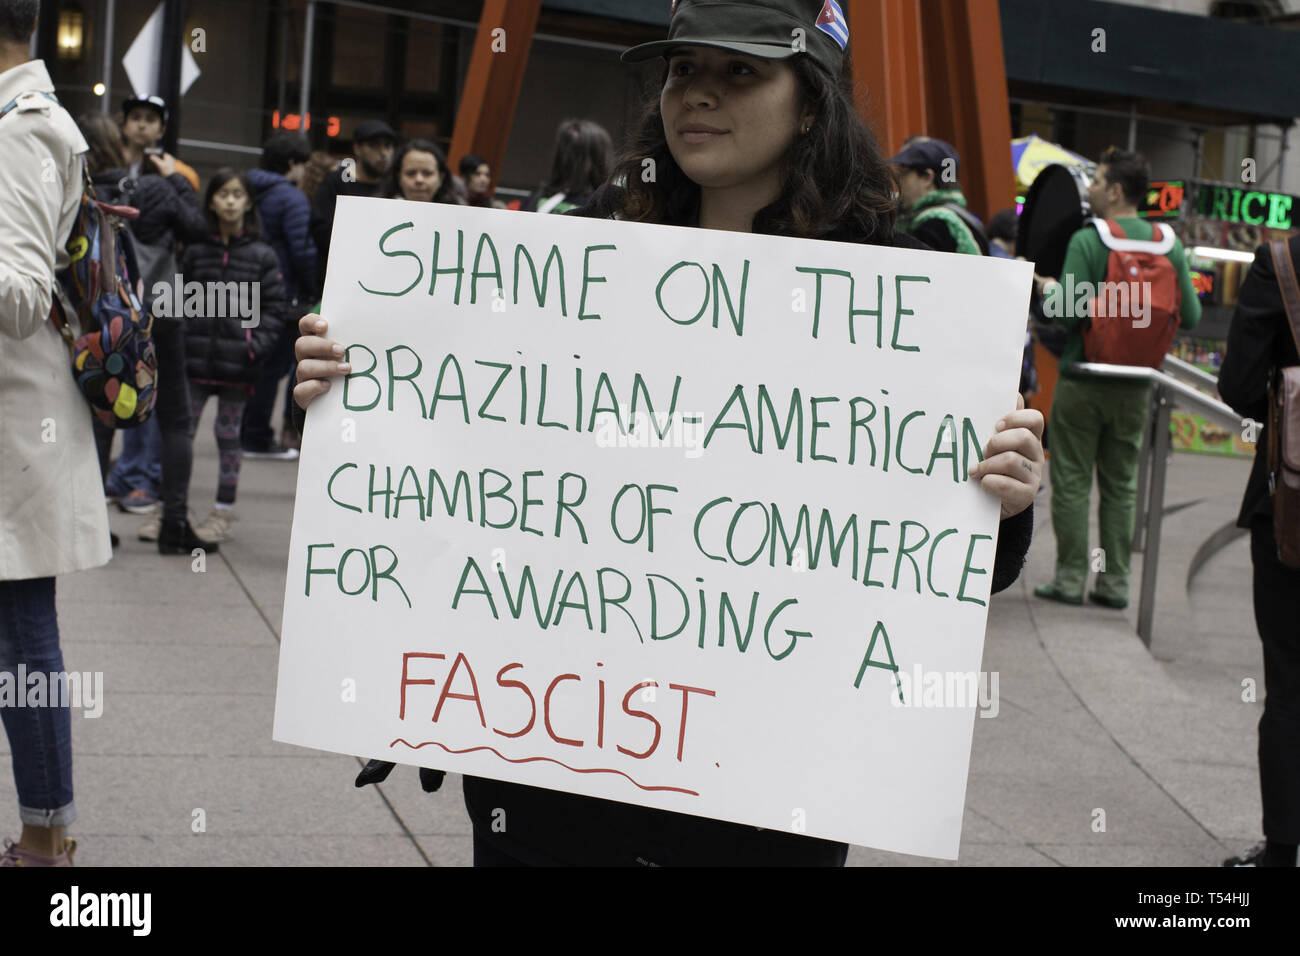 New York, New York, USA. 20th Apr, 2019. GEORGIA KIRILOV holds a protest sign at Zuccotti Park in New York, New York during a demonstration against the Brazilian-American Chamber of Commerce, which later in May, plans to award far-right Brazilian President Jair Bolsonaro the 'man of the Year Award.''.Earlier this month The American Museum of Natural History in New York has announced that it will not host the event honoring Bolsonaro because of his outspoken desire to roll back environmental protections Credit: Brian Branch Price/ZUMA Wire/Alamy Live News Stock Photo